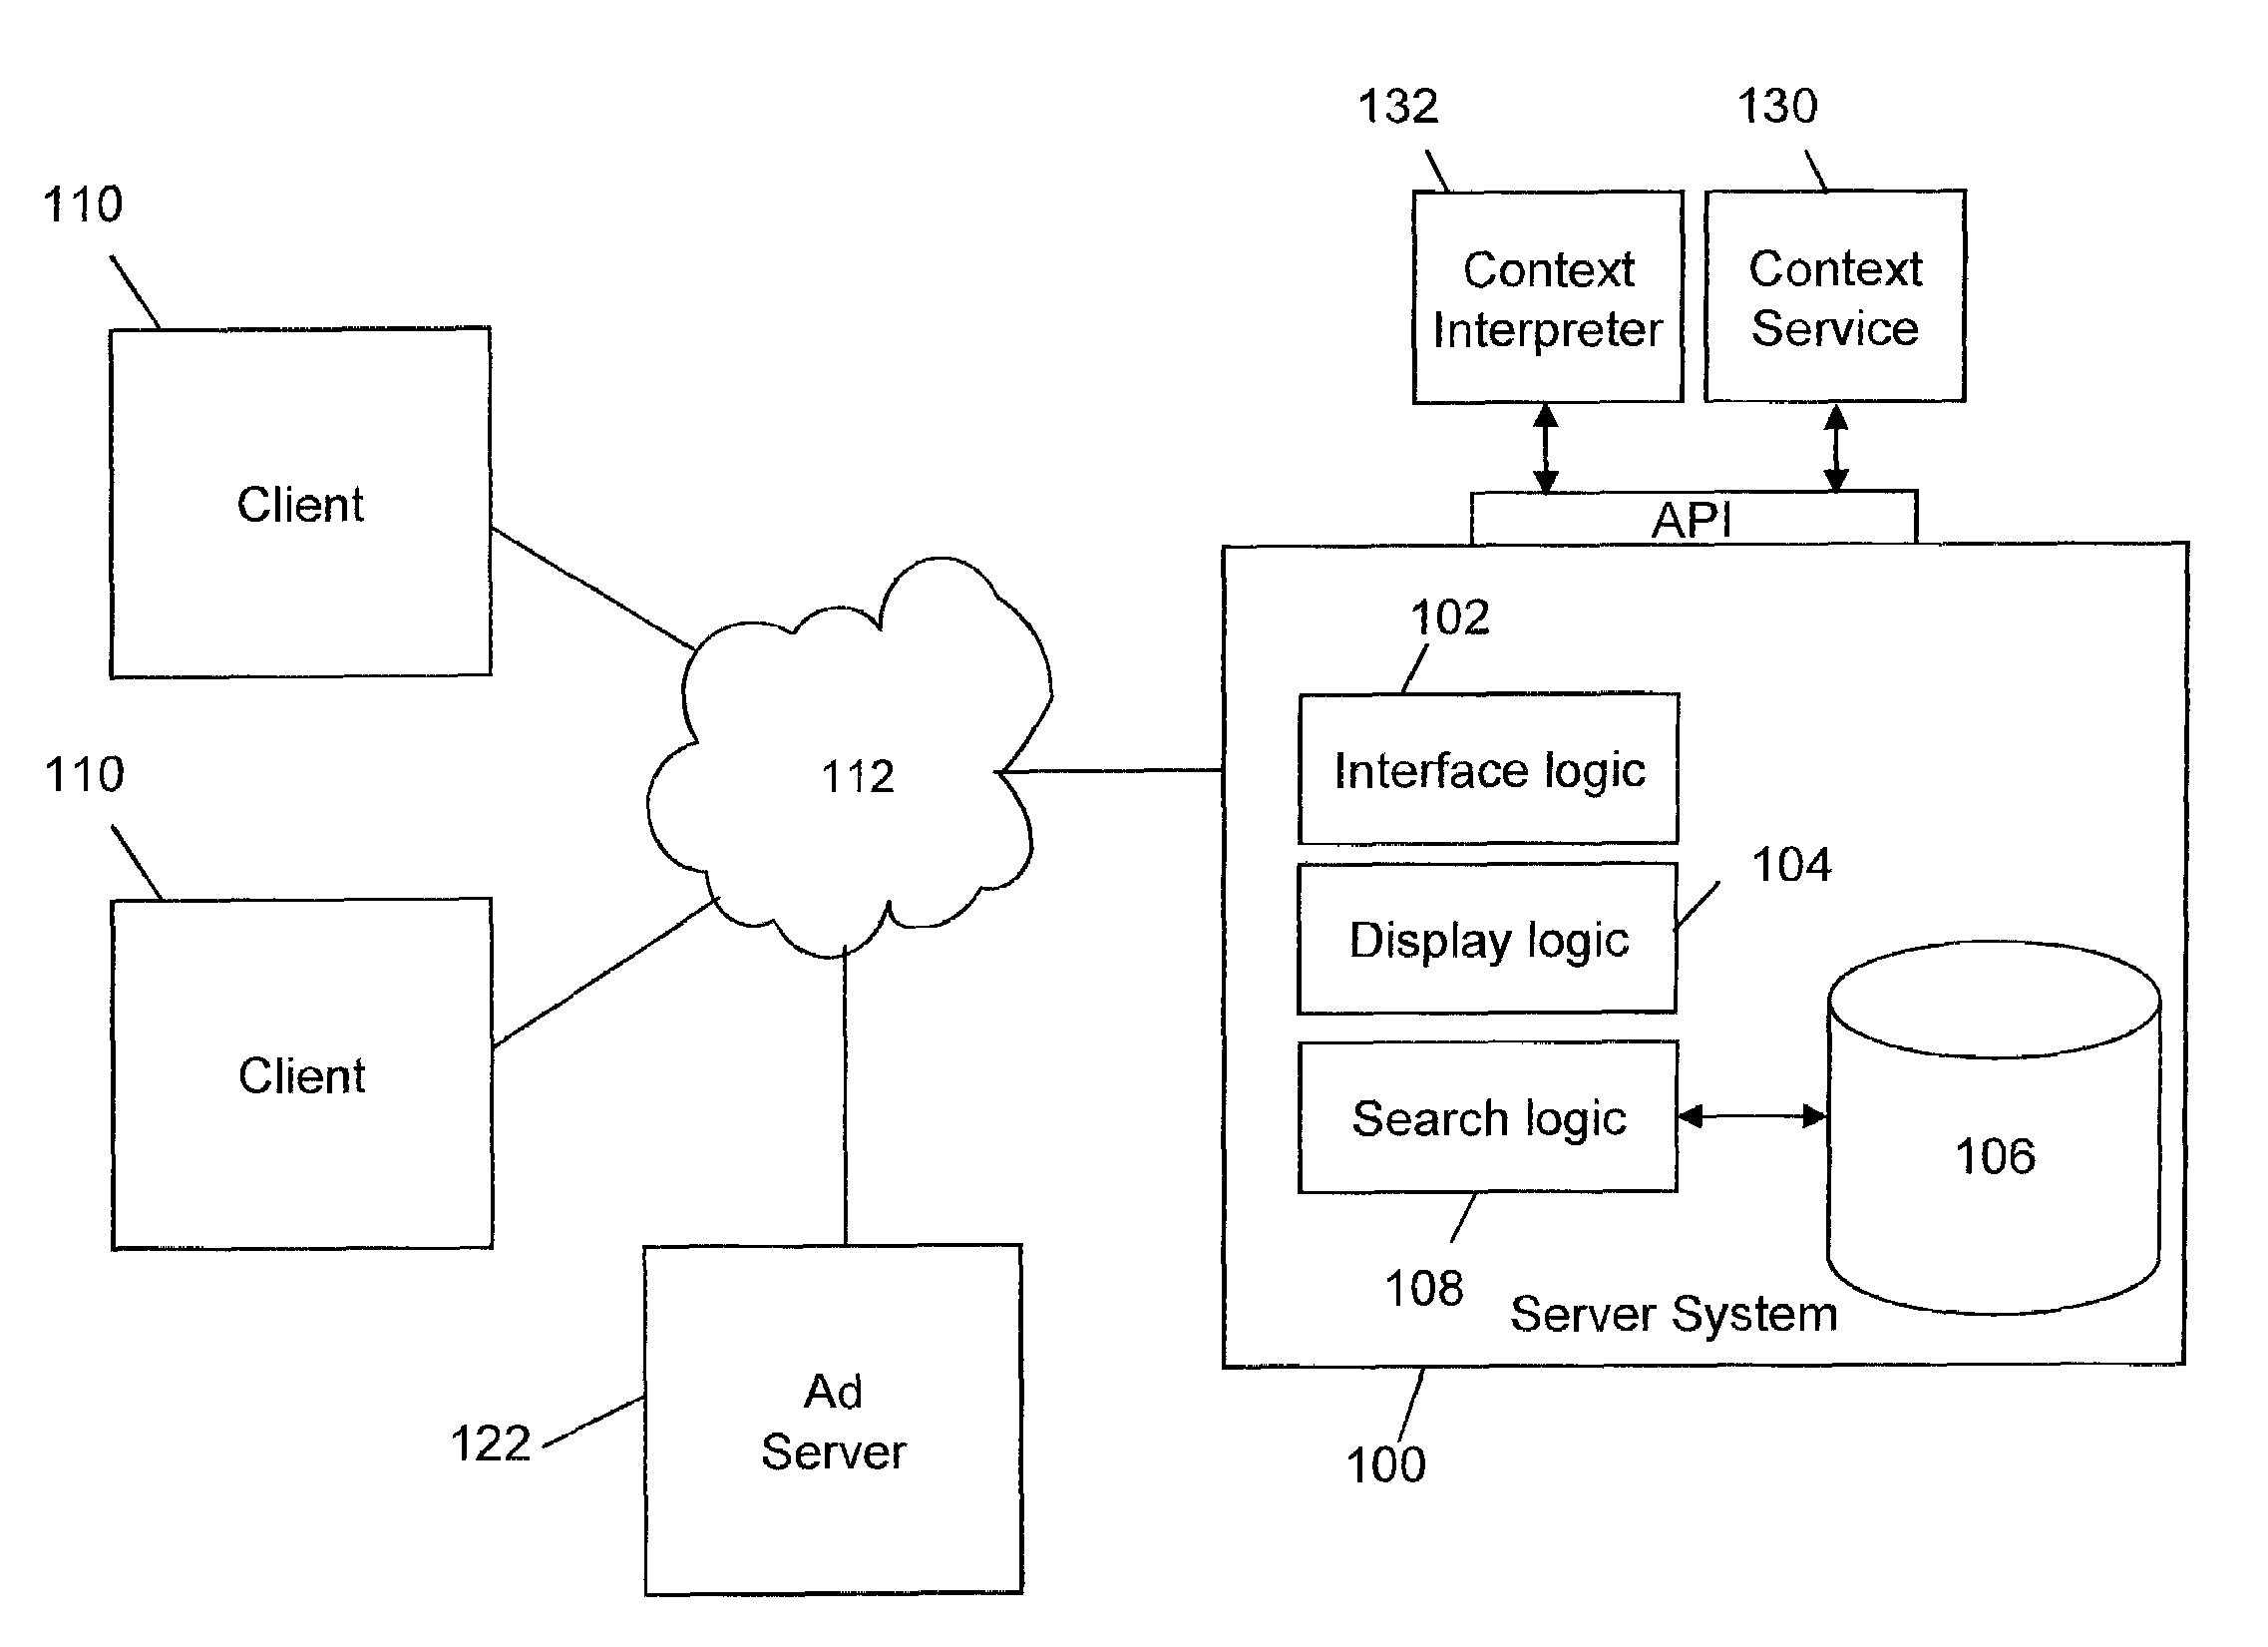 Text display of geo-referenced information based on relative distance to a user location